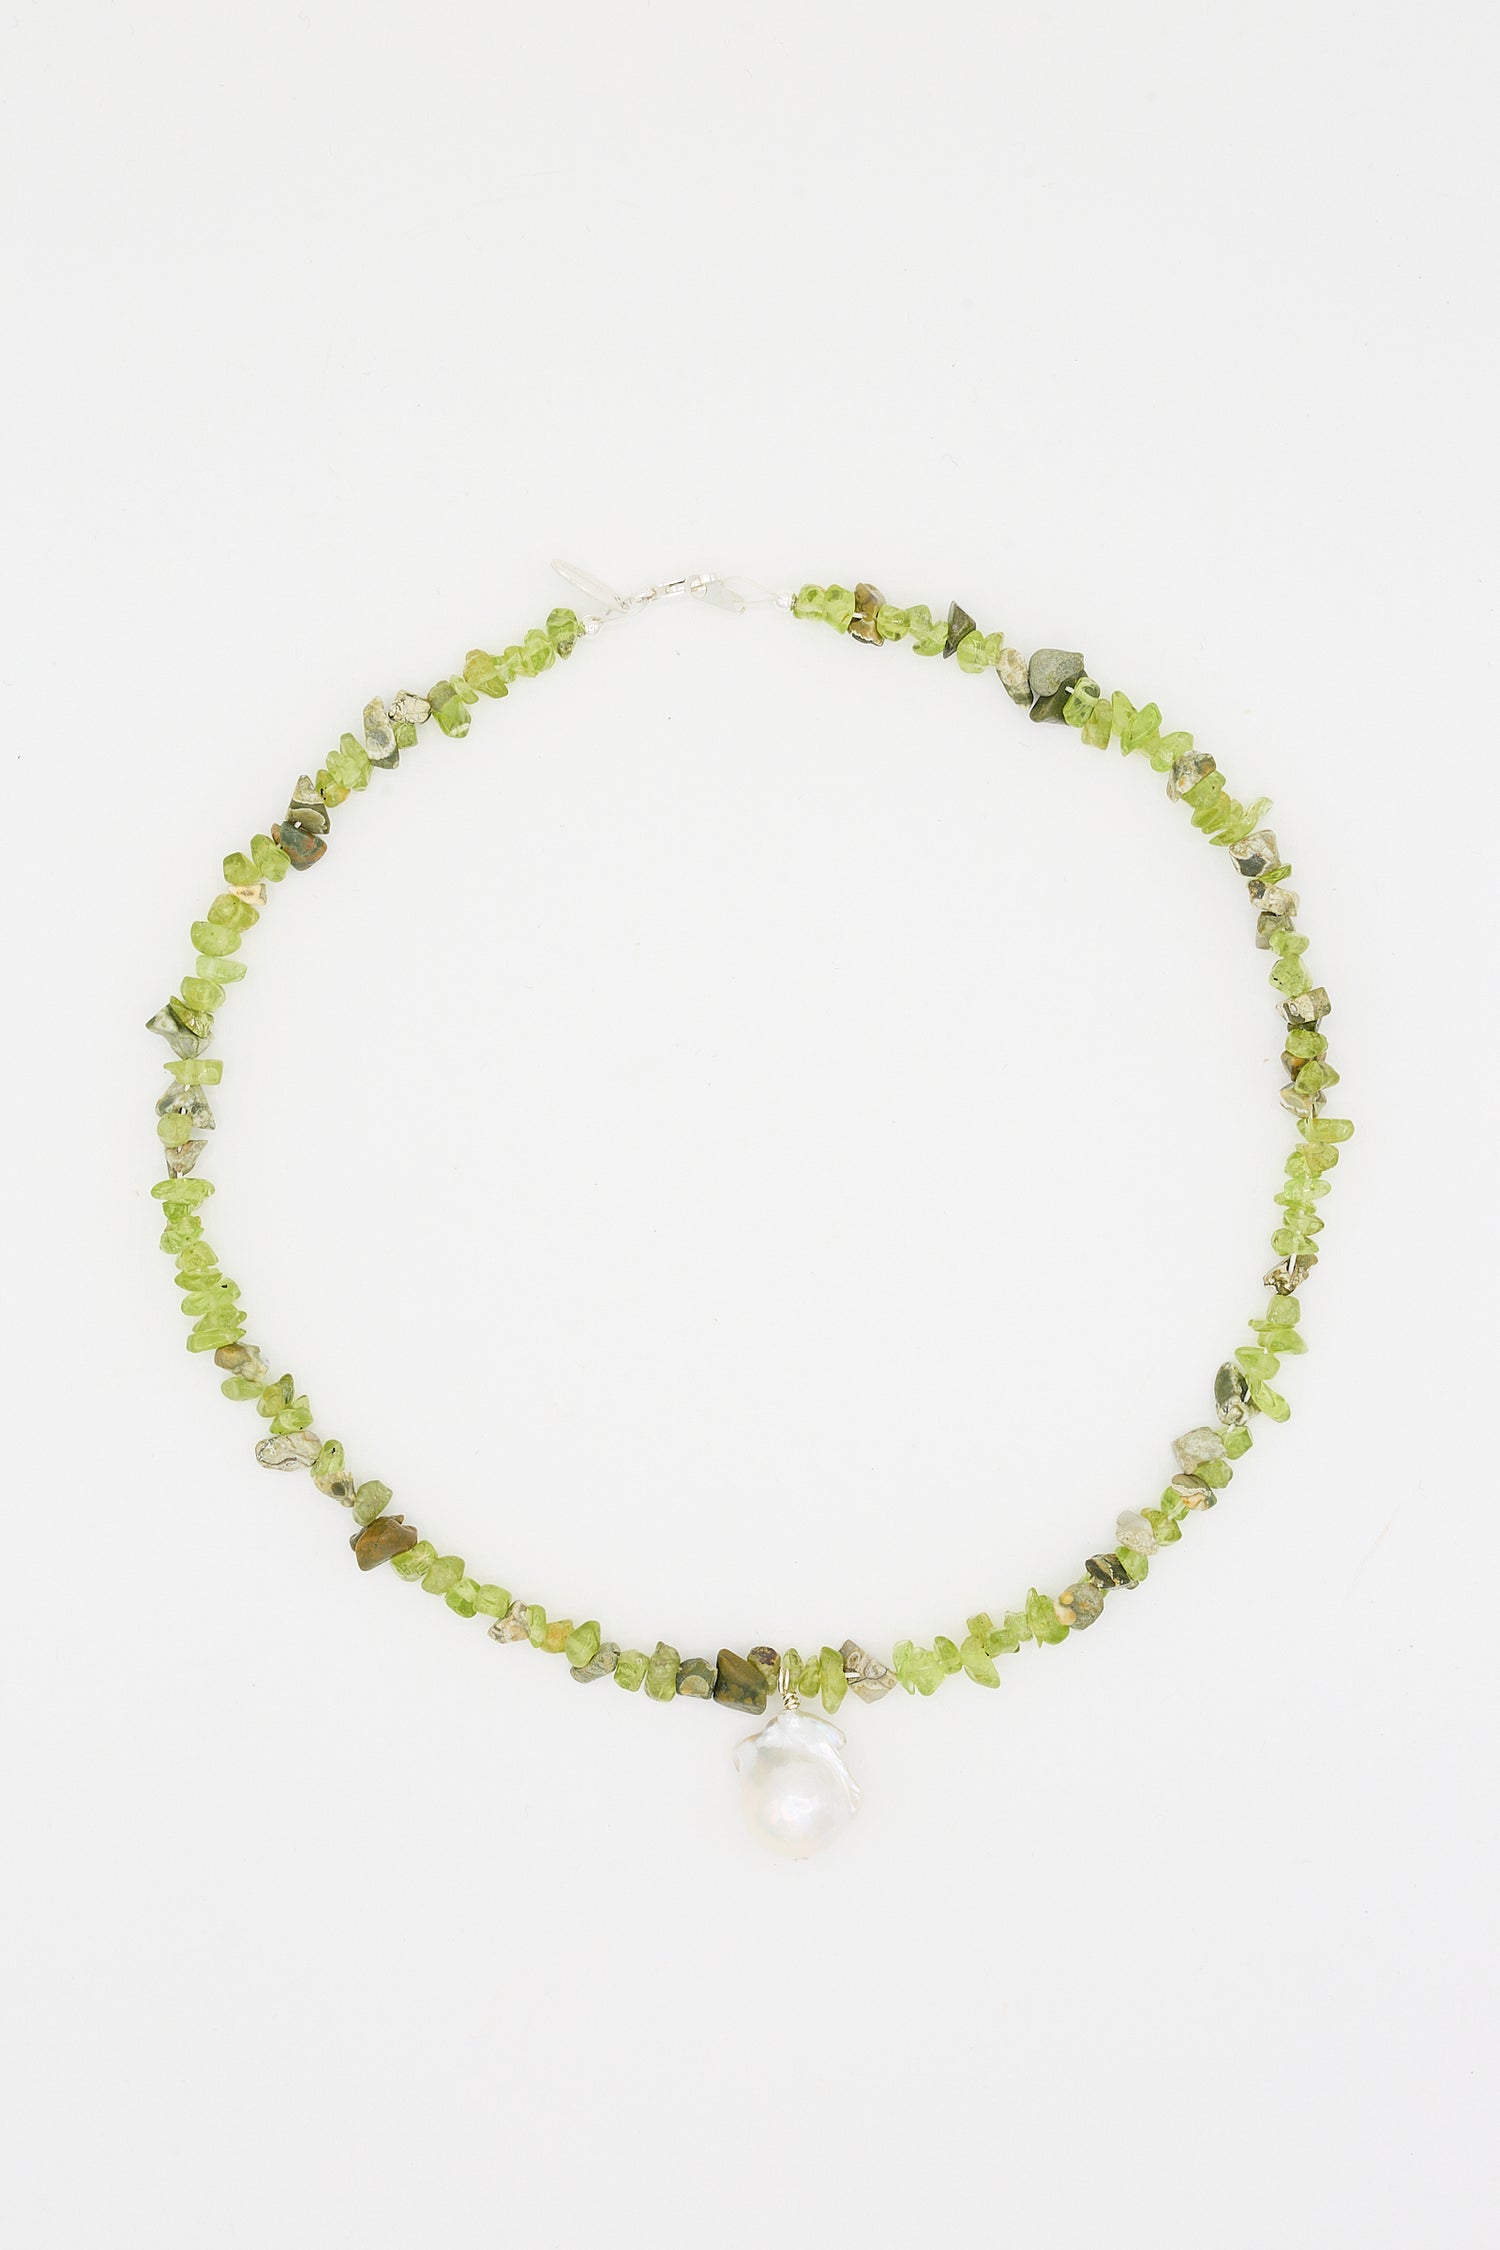 Santangelo's Kitano Necklace in Green with a single cultured fireball pearl pendant on a white background.